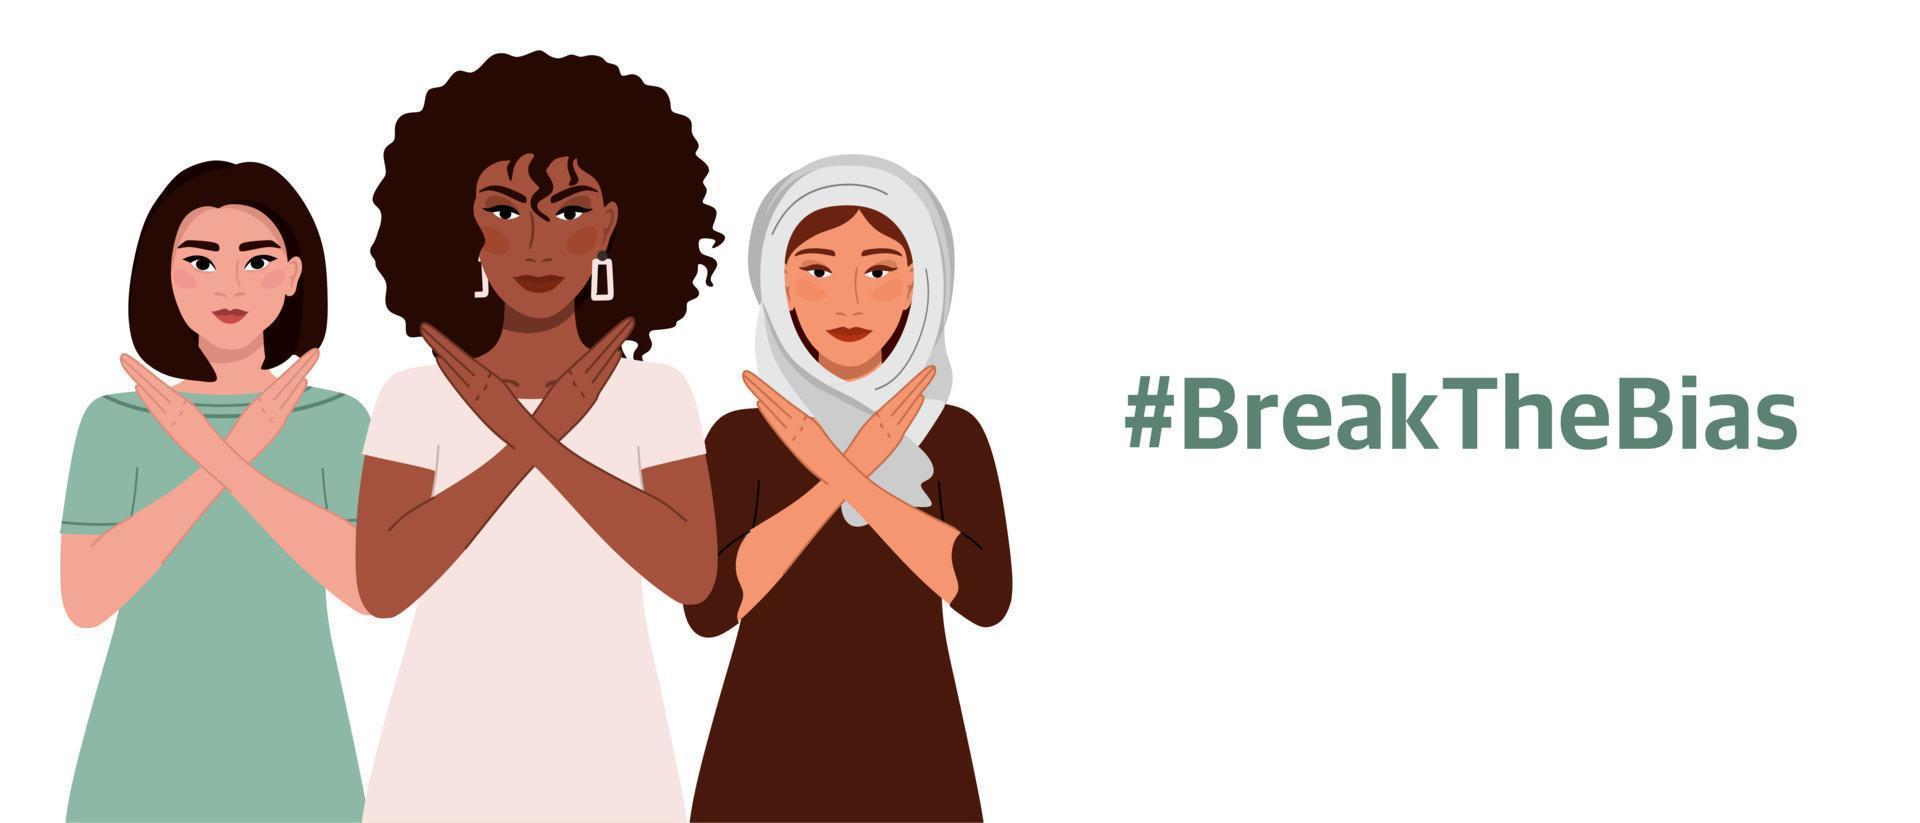 Break the bias. A group of women of different nationalities. Vector illustration of the Movement against Discrimination and Inequality Vector illustration